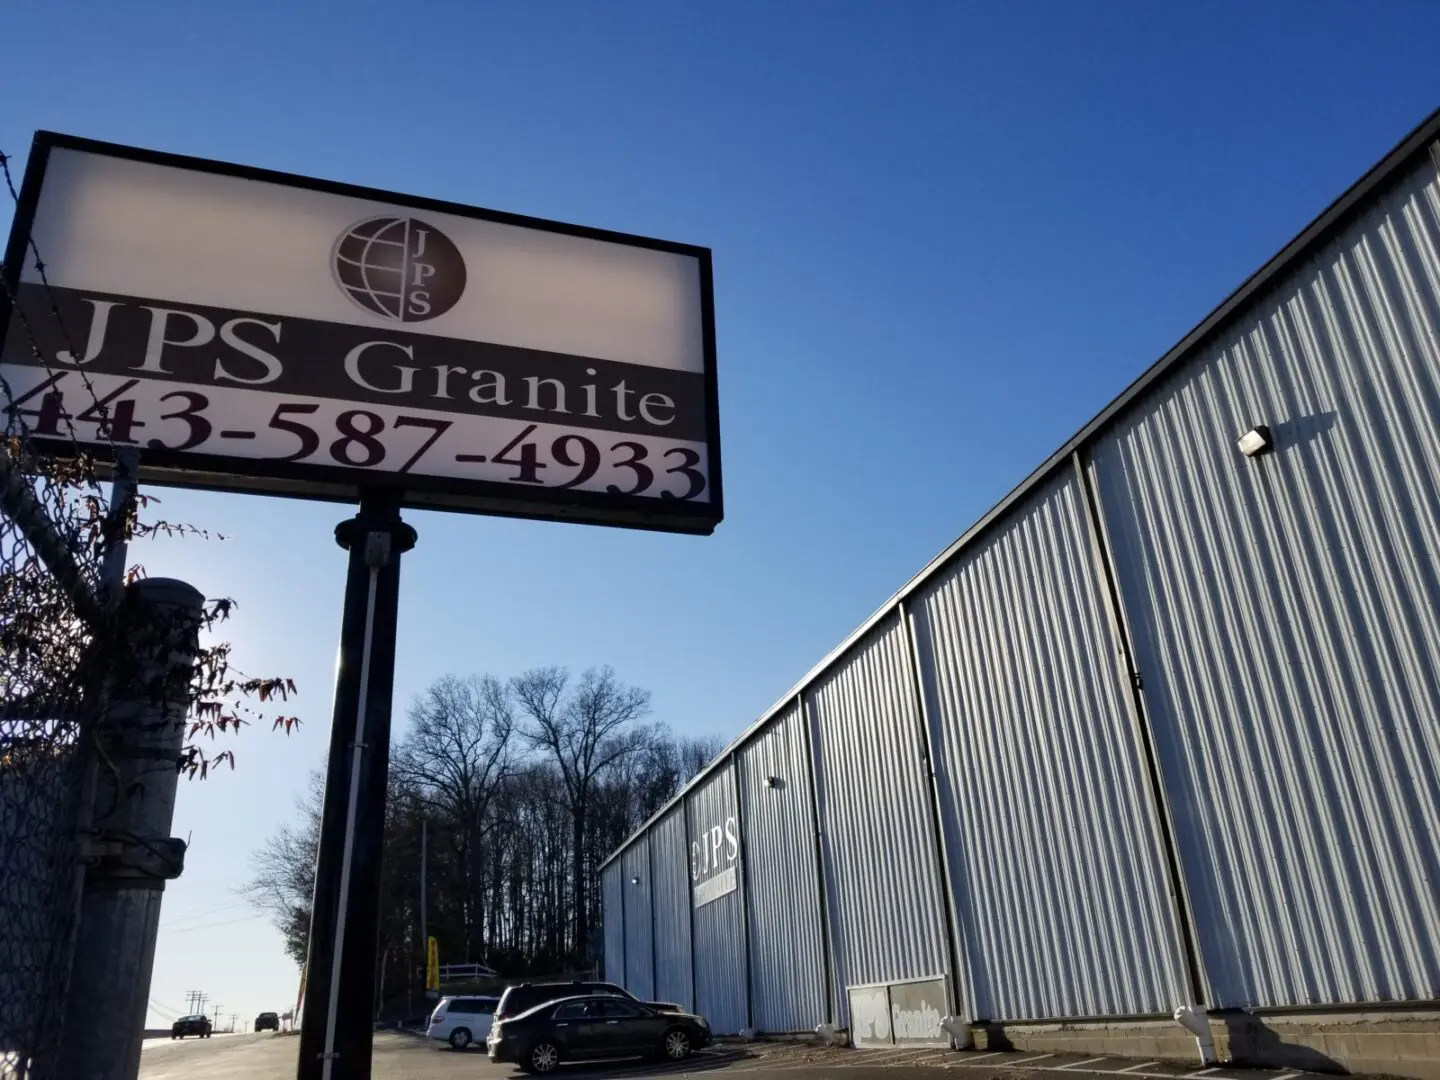 A sign for jps granite with contact information displayed in front of a corrugated metal building under a clear sky.